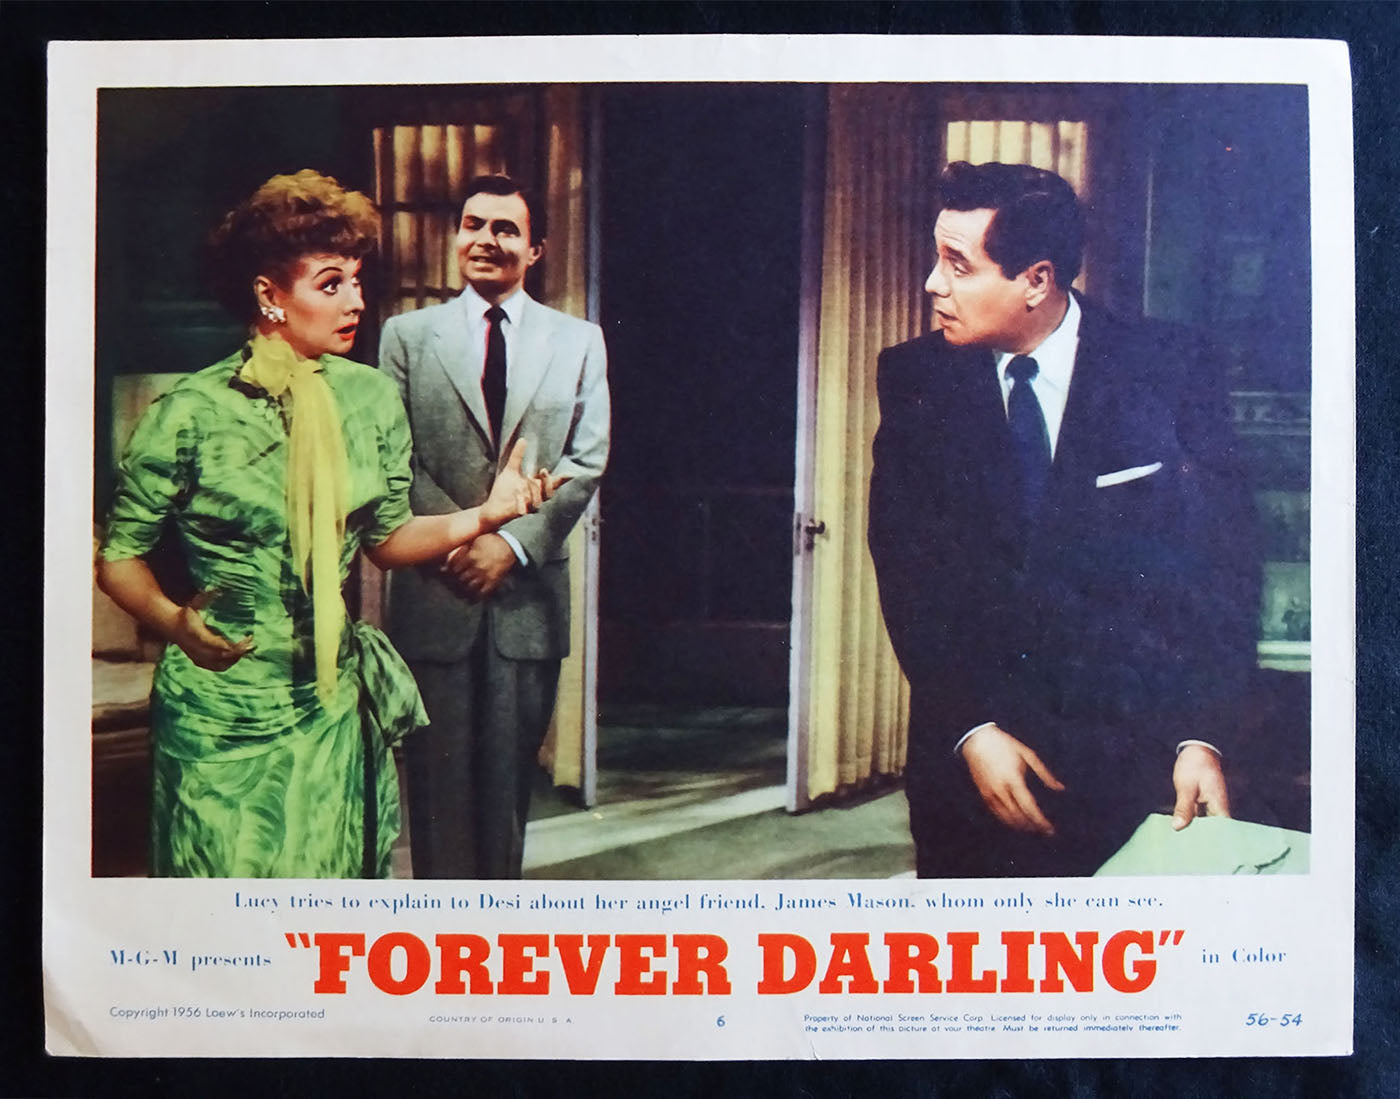 Forever Darling (1956) Lobby Card (Very Fine condition) Lucille Ball, Desi Arnaz, James Mason